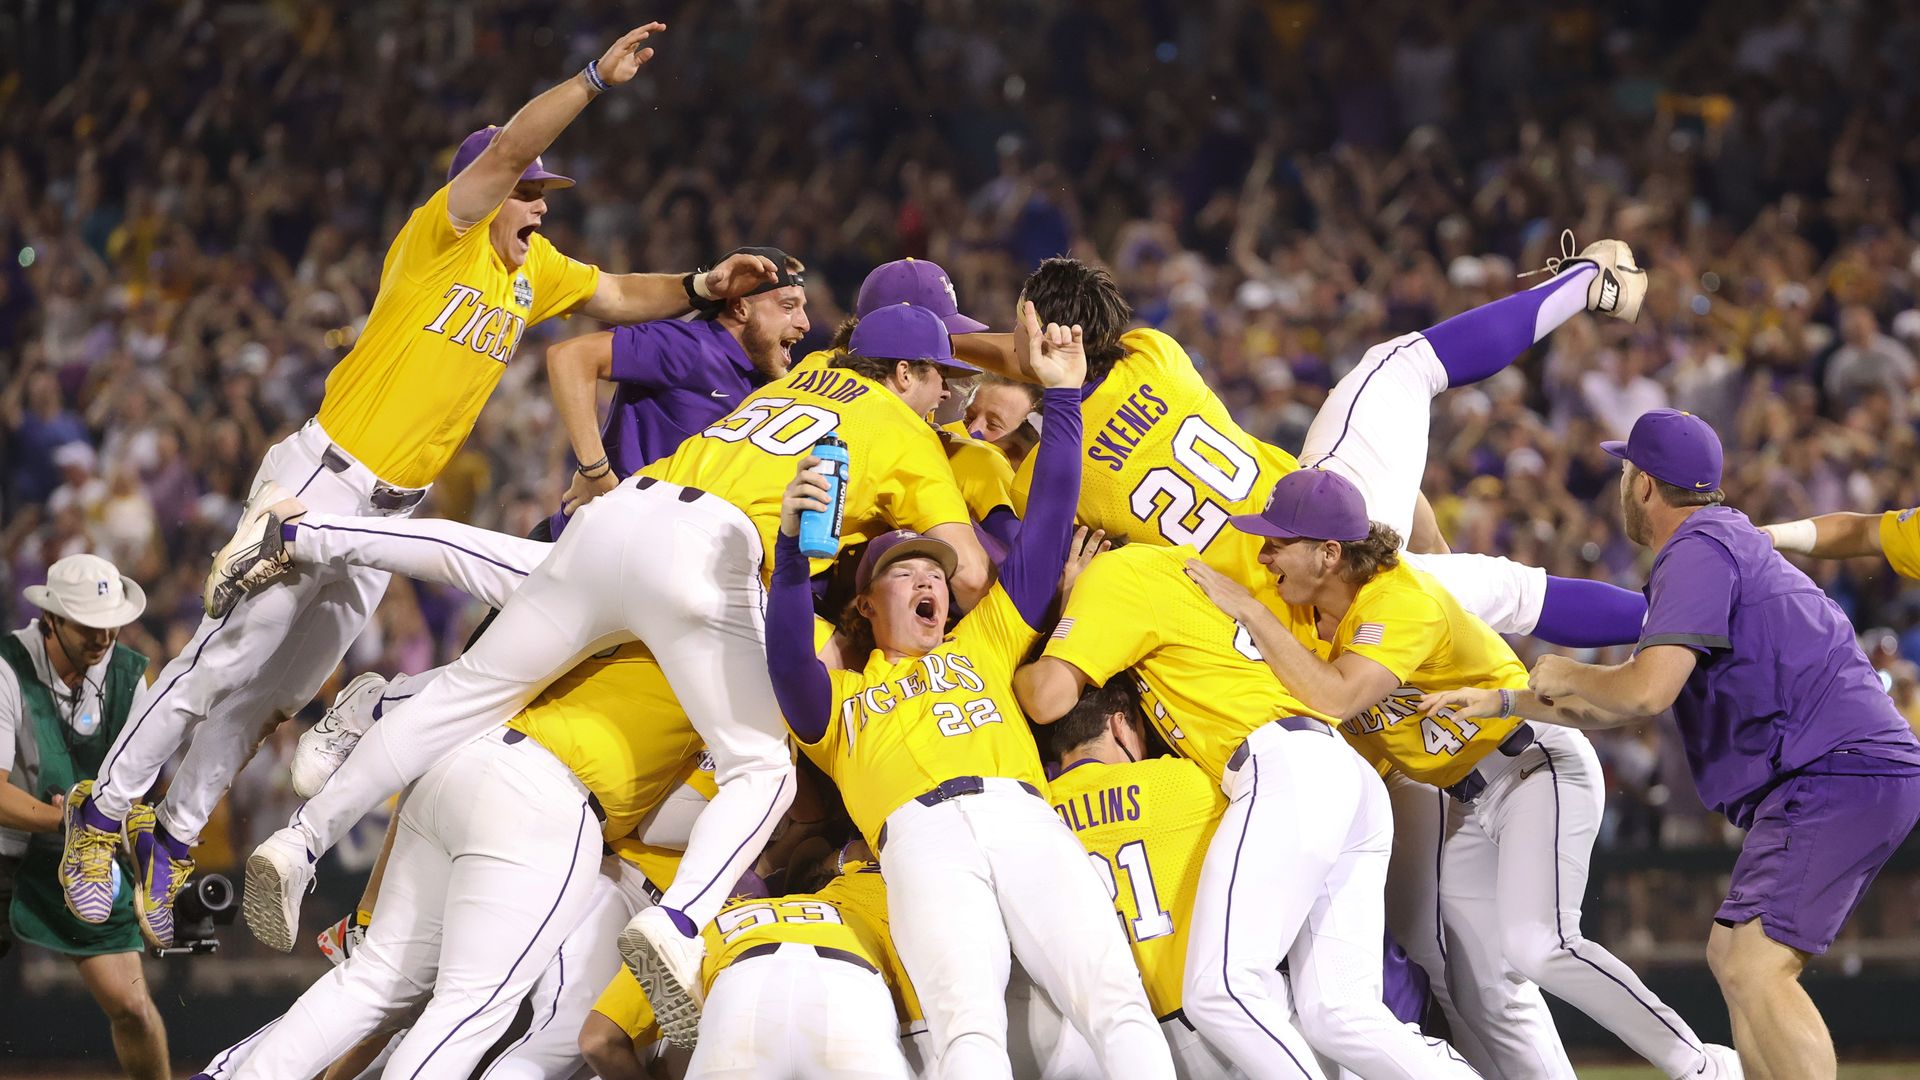 LSU baseball crushes Florida in College World Series to win seventh